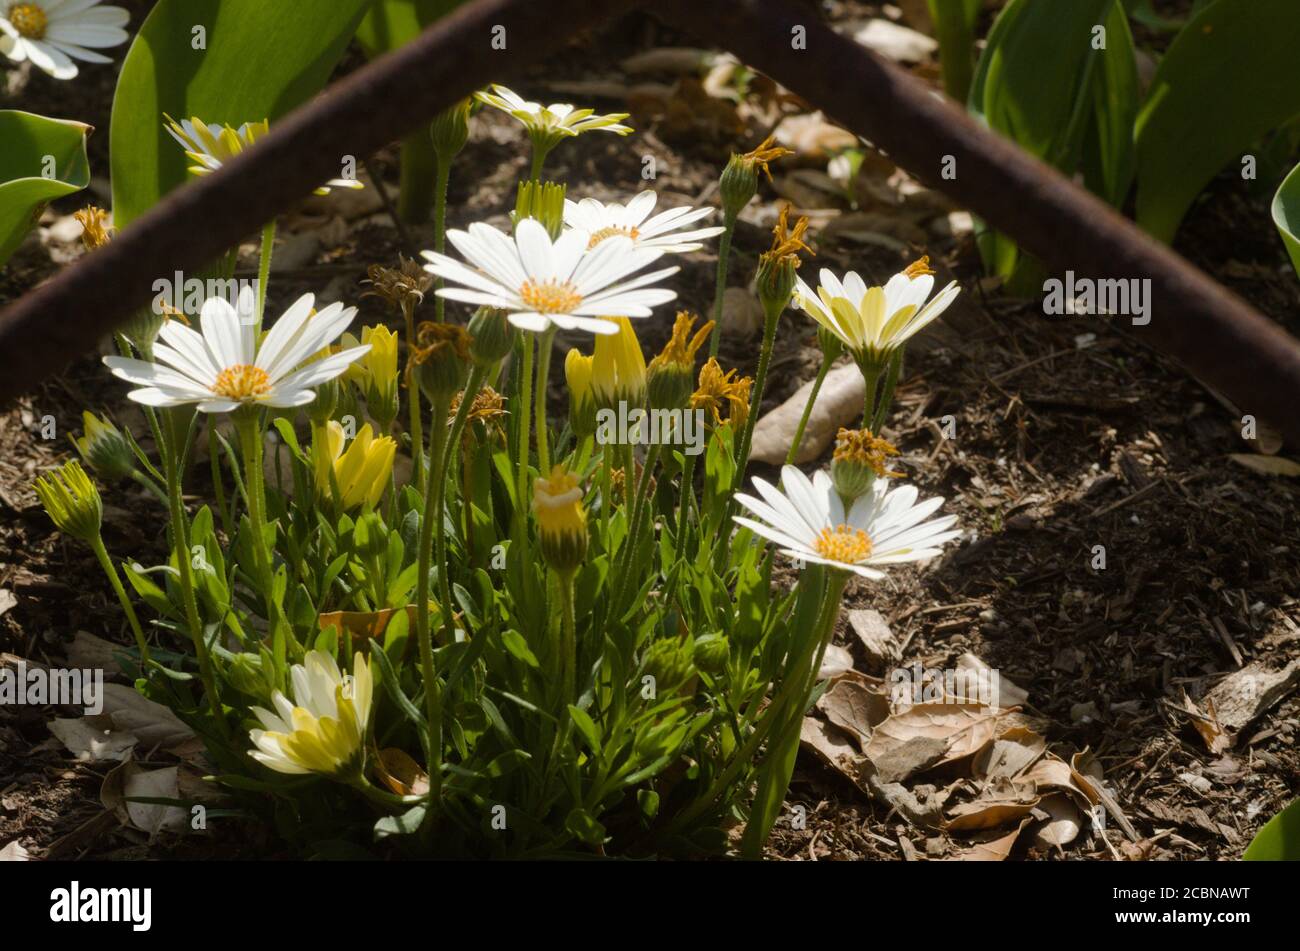 Garden  daisy natural flora arrangement and frames bu rusty iron barrier rods, among other greenery outdoors, this is spring and nature's finest. Stock Photo